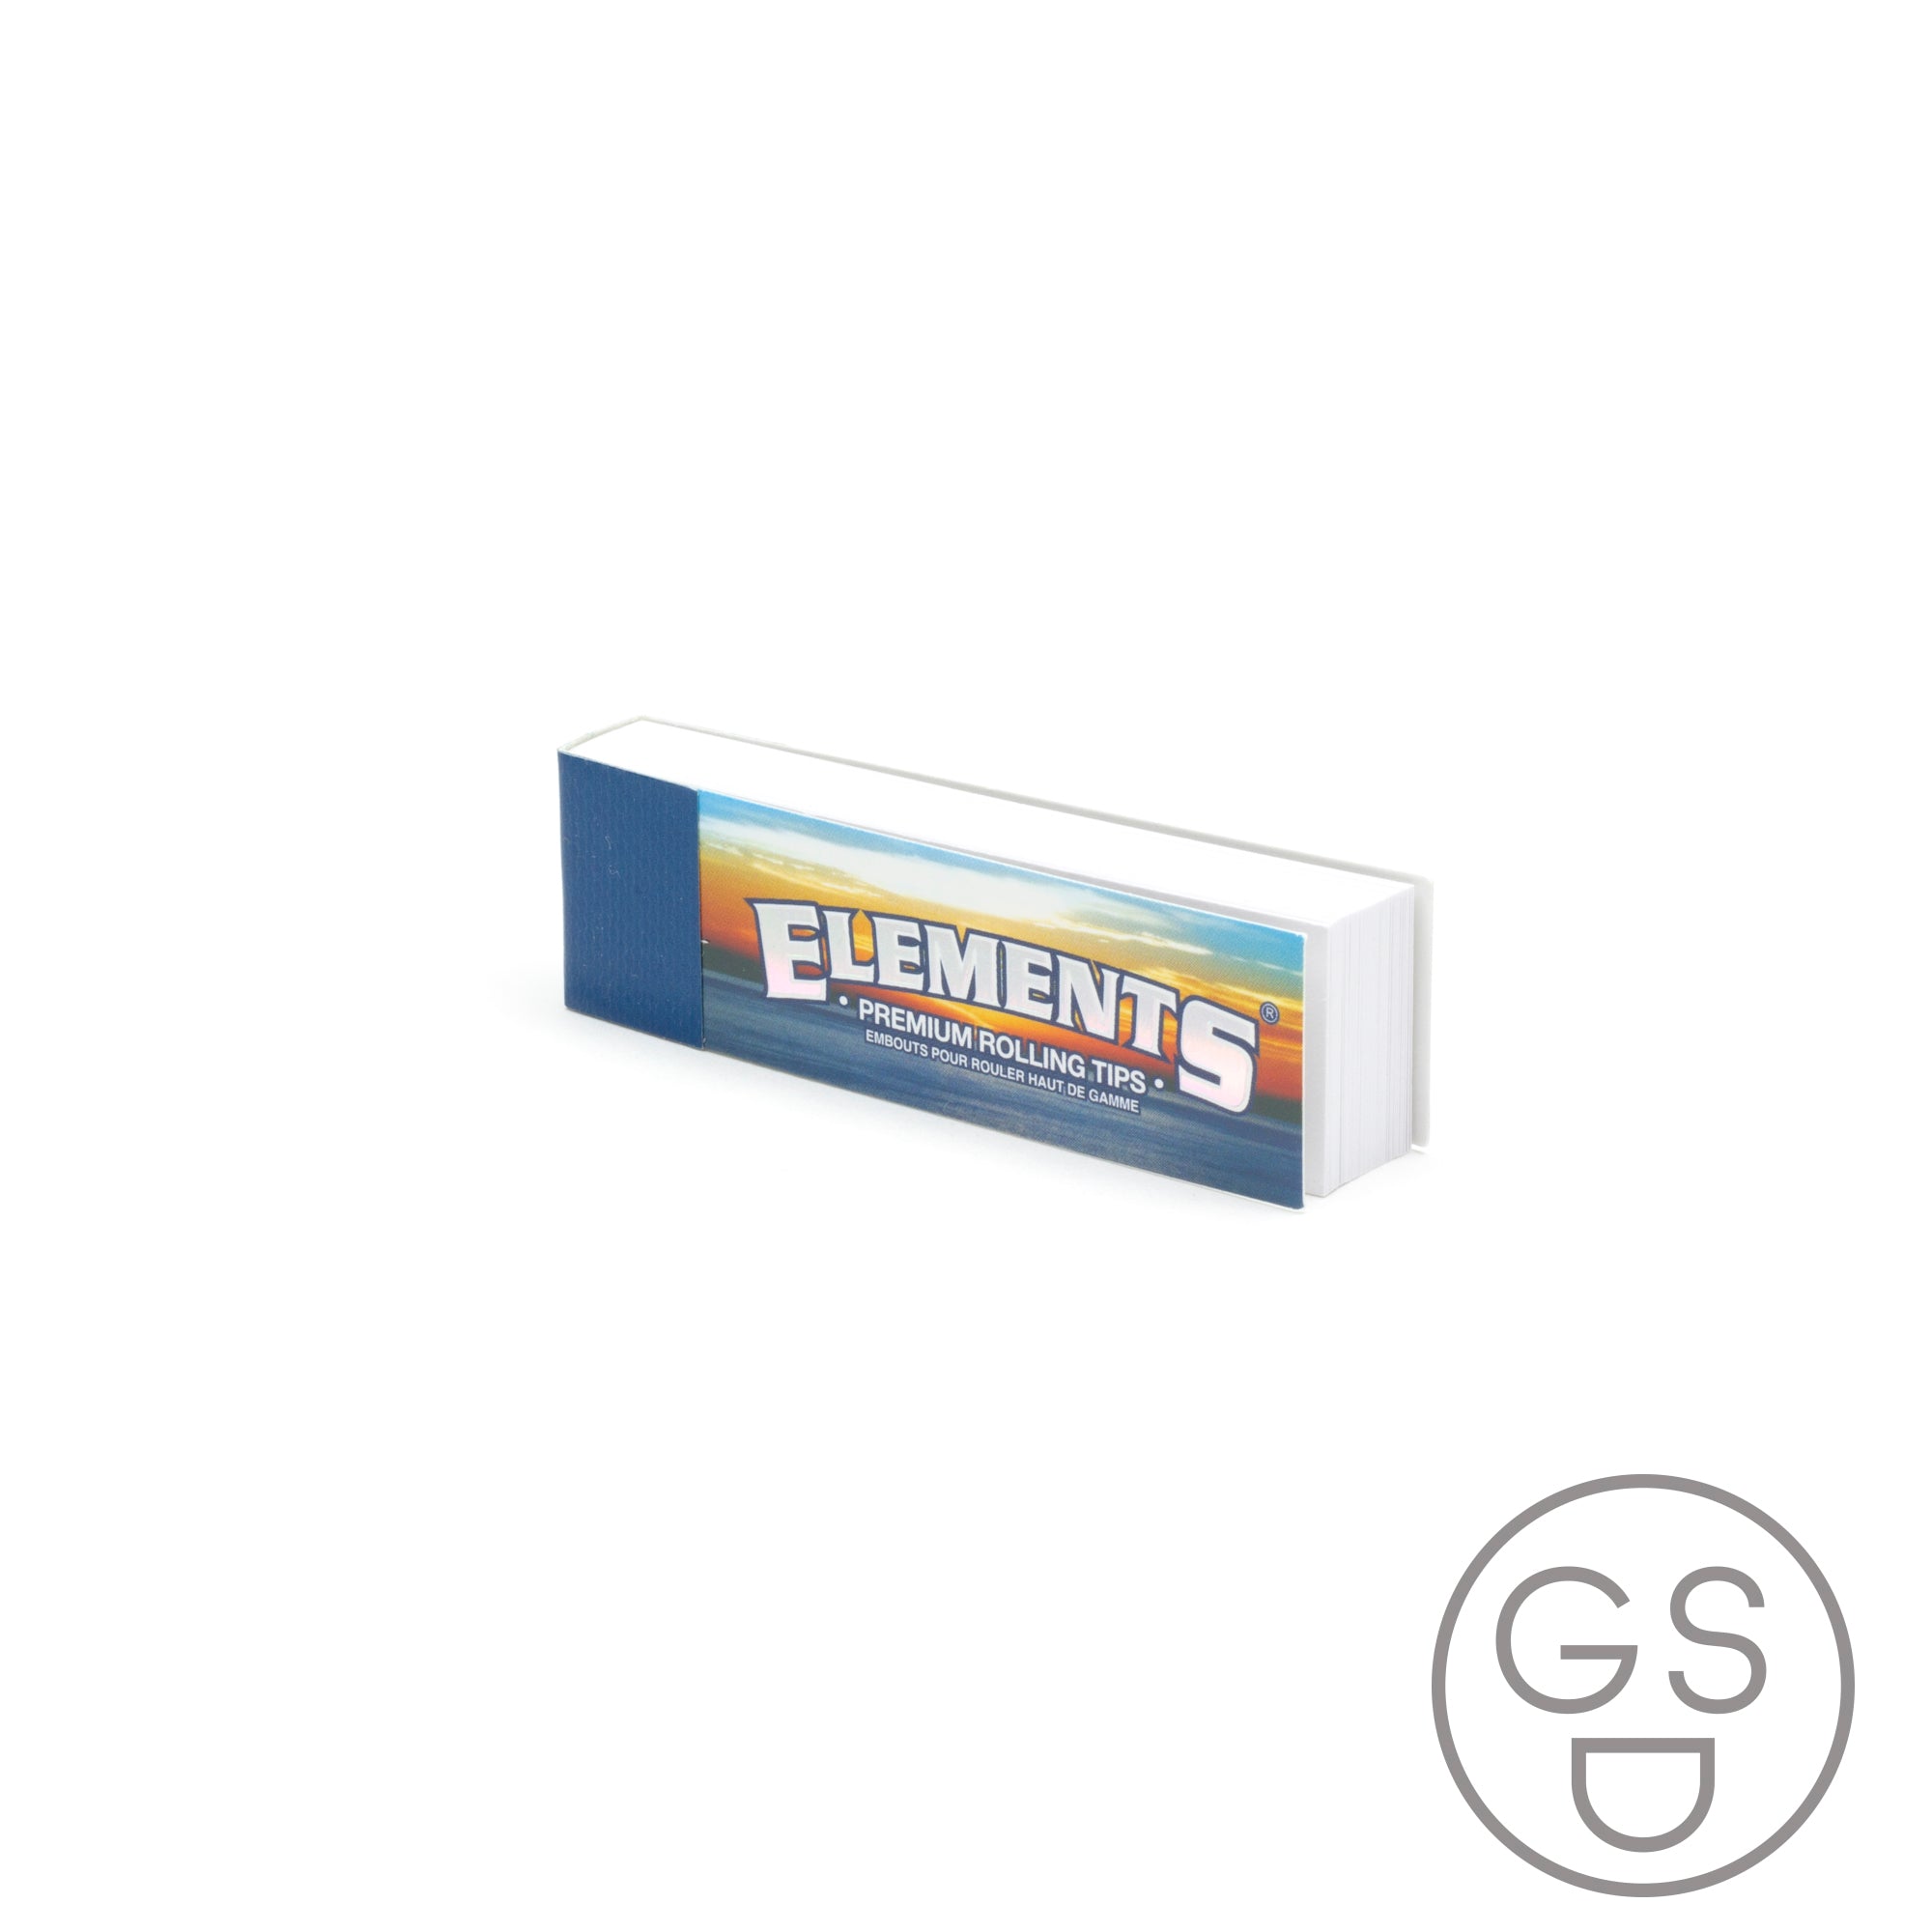 Elements - Rolling Tips - 50 in a booklet